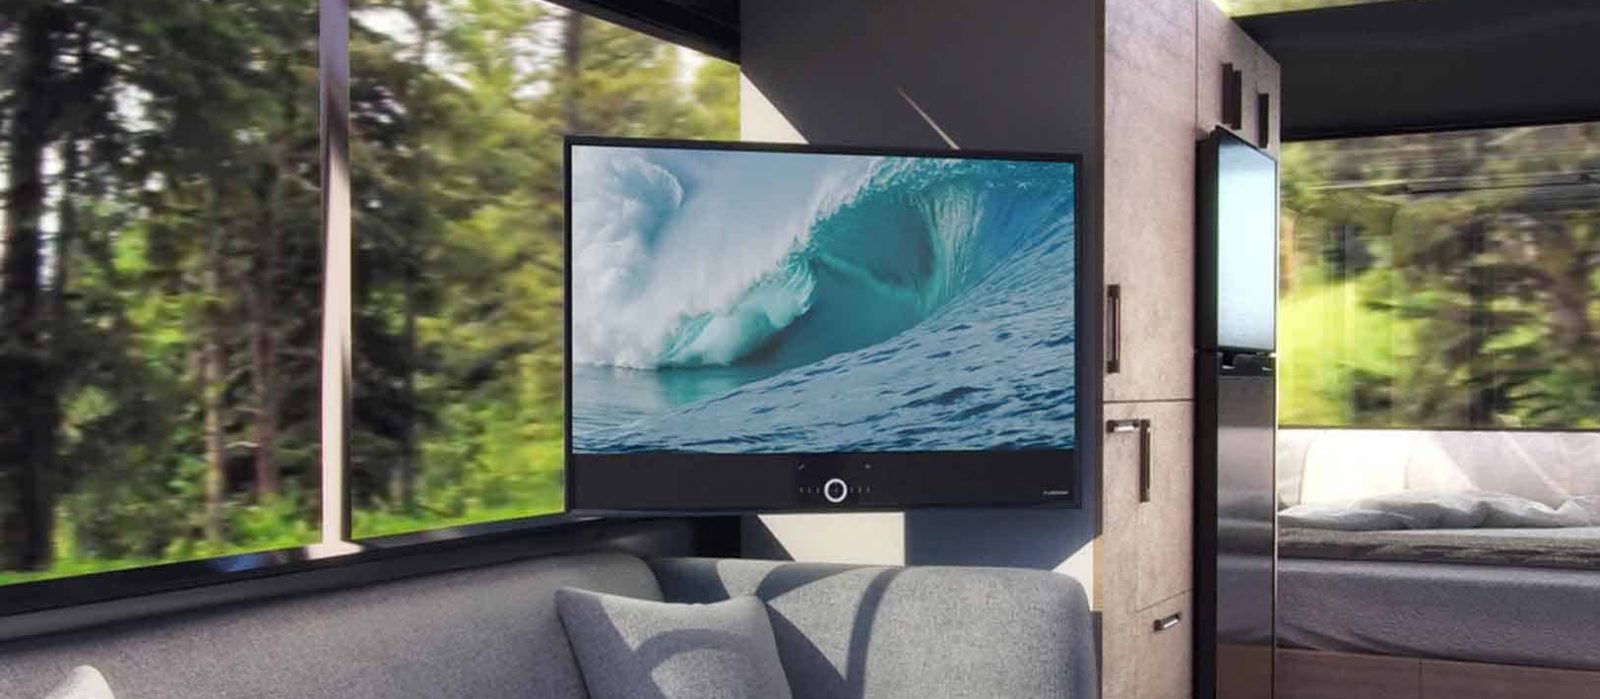 how to install a flat screen TV in an RV